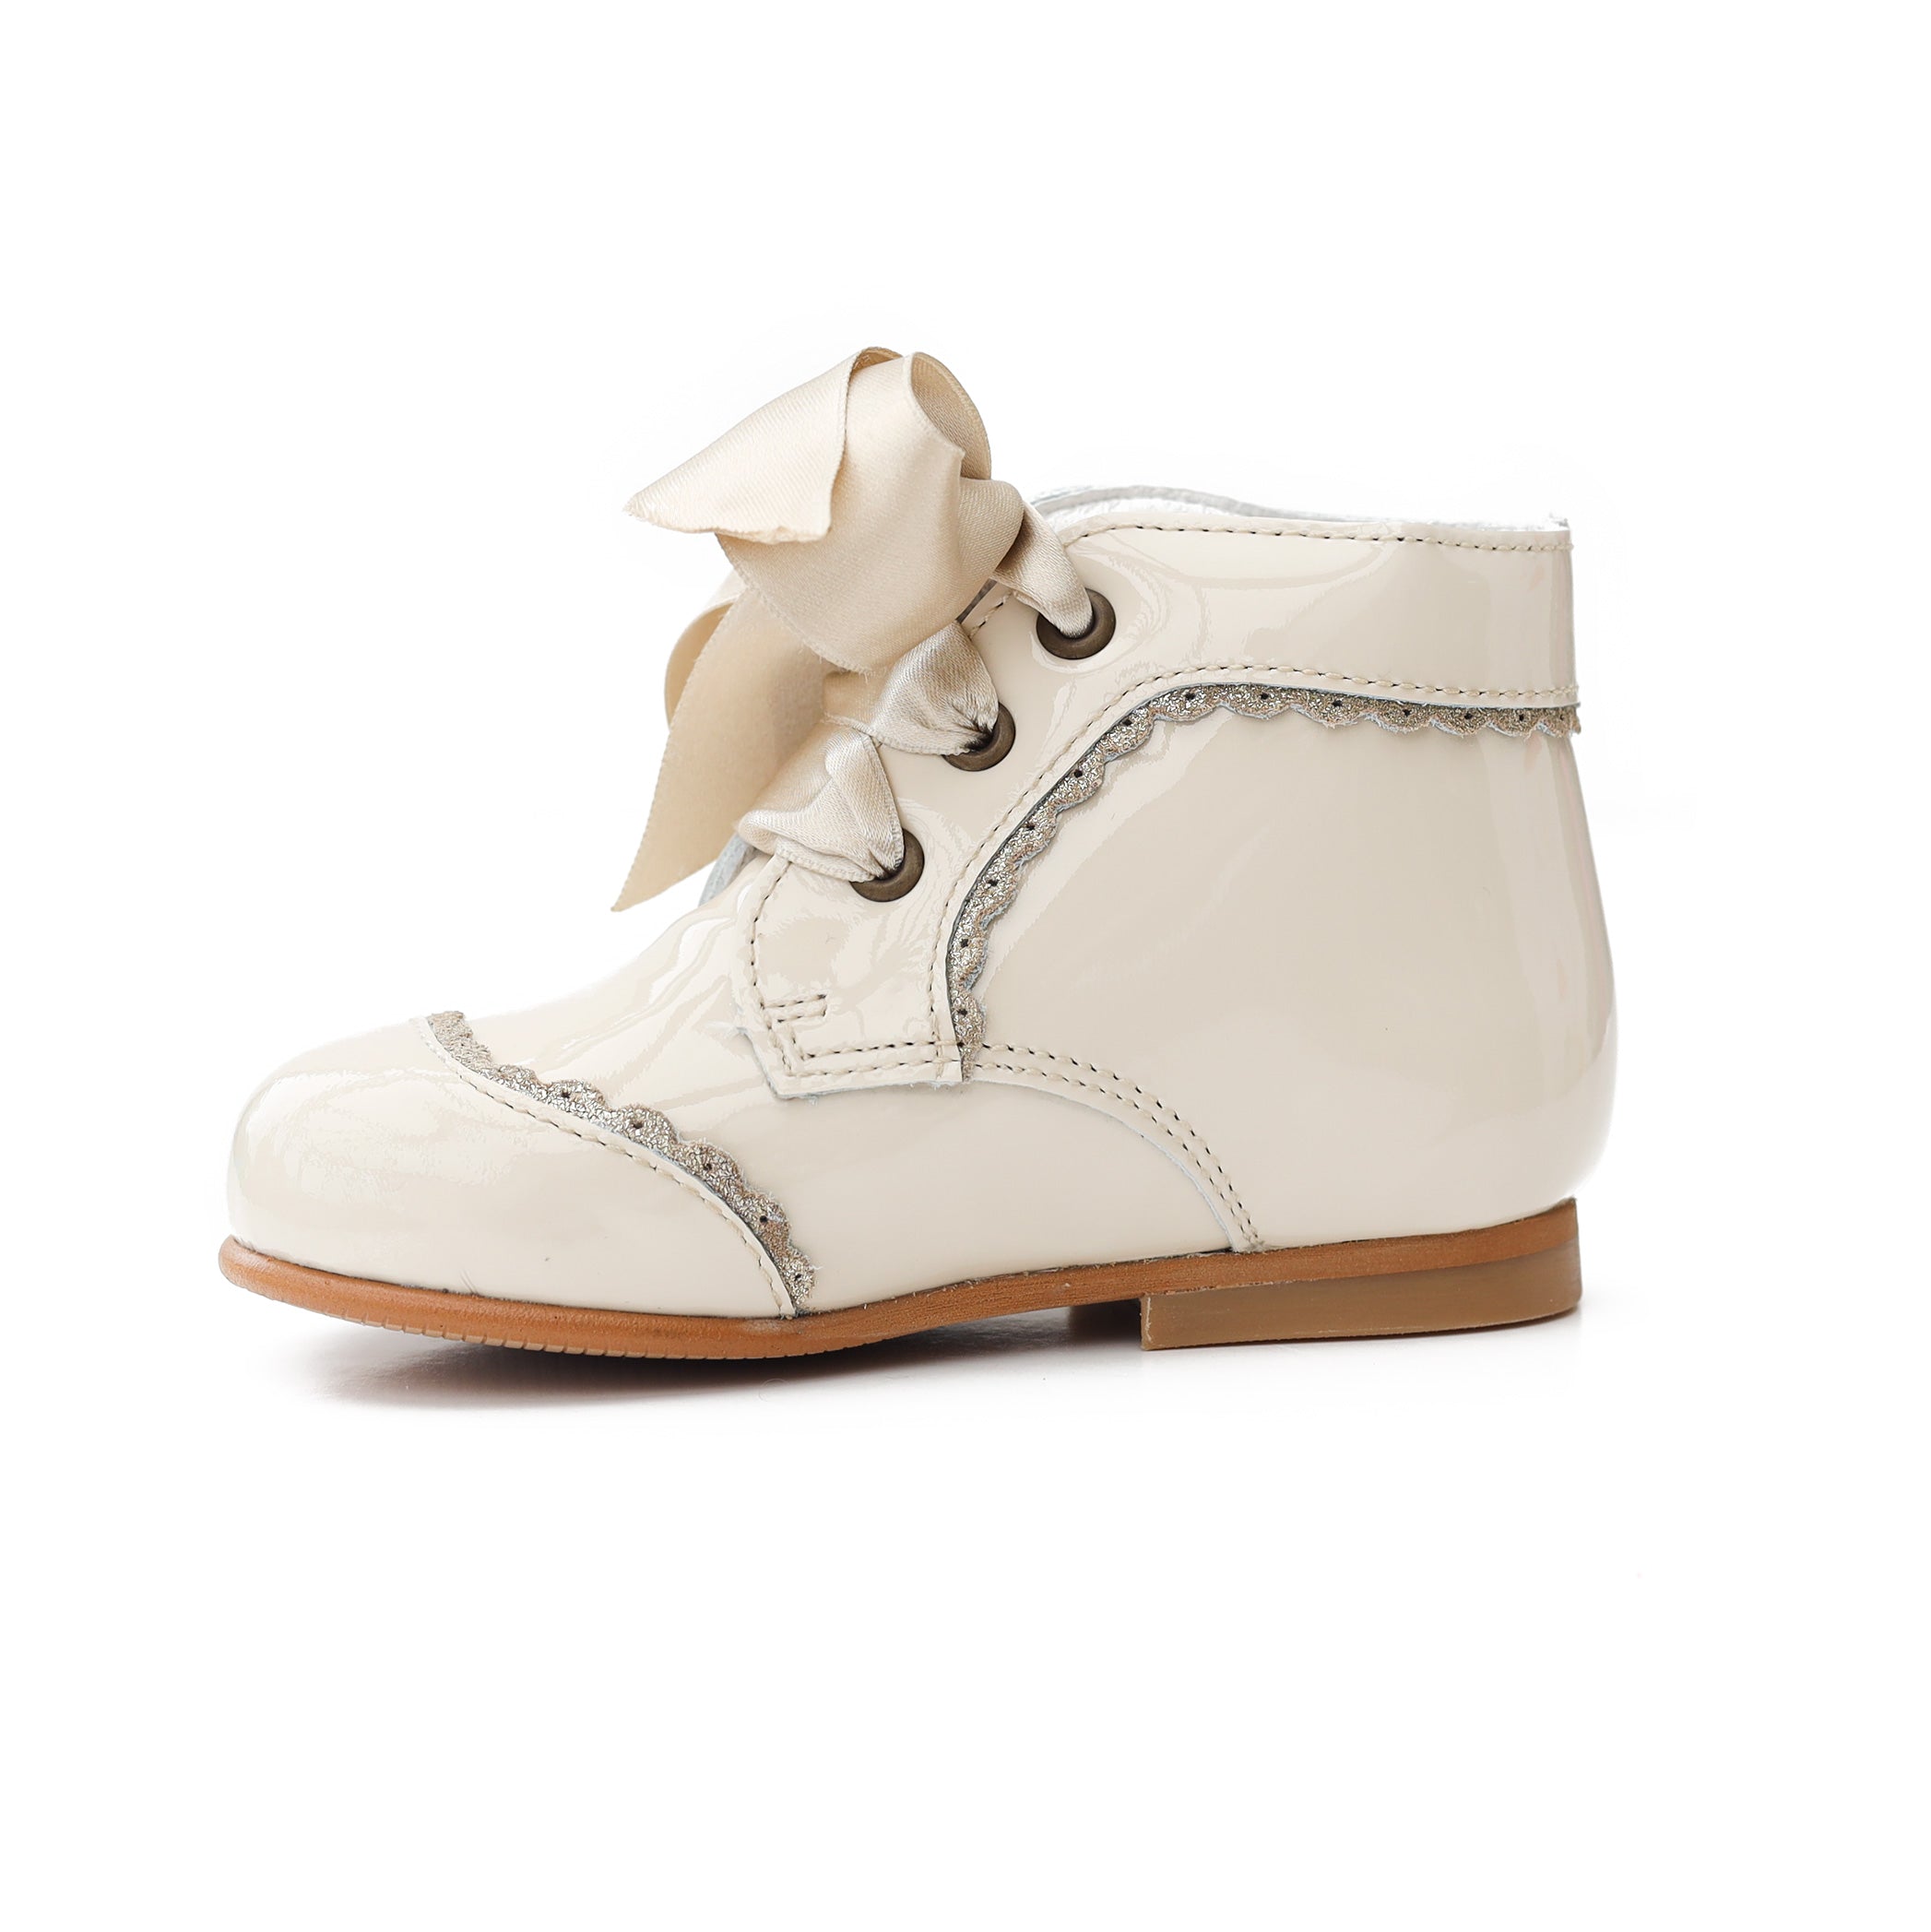 Patent Leather Boots - Ivory & Gold Trim (EU27)